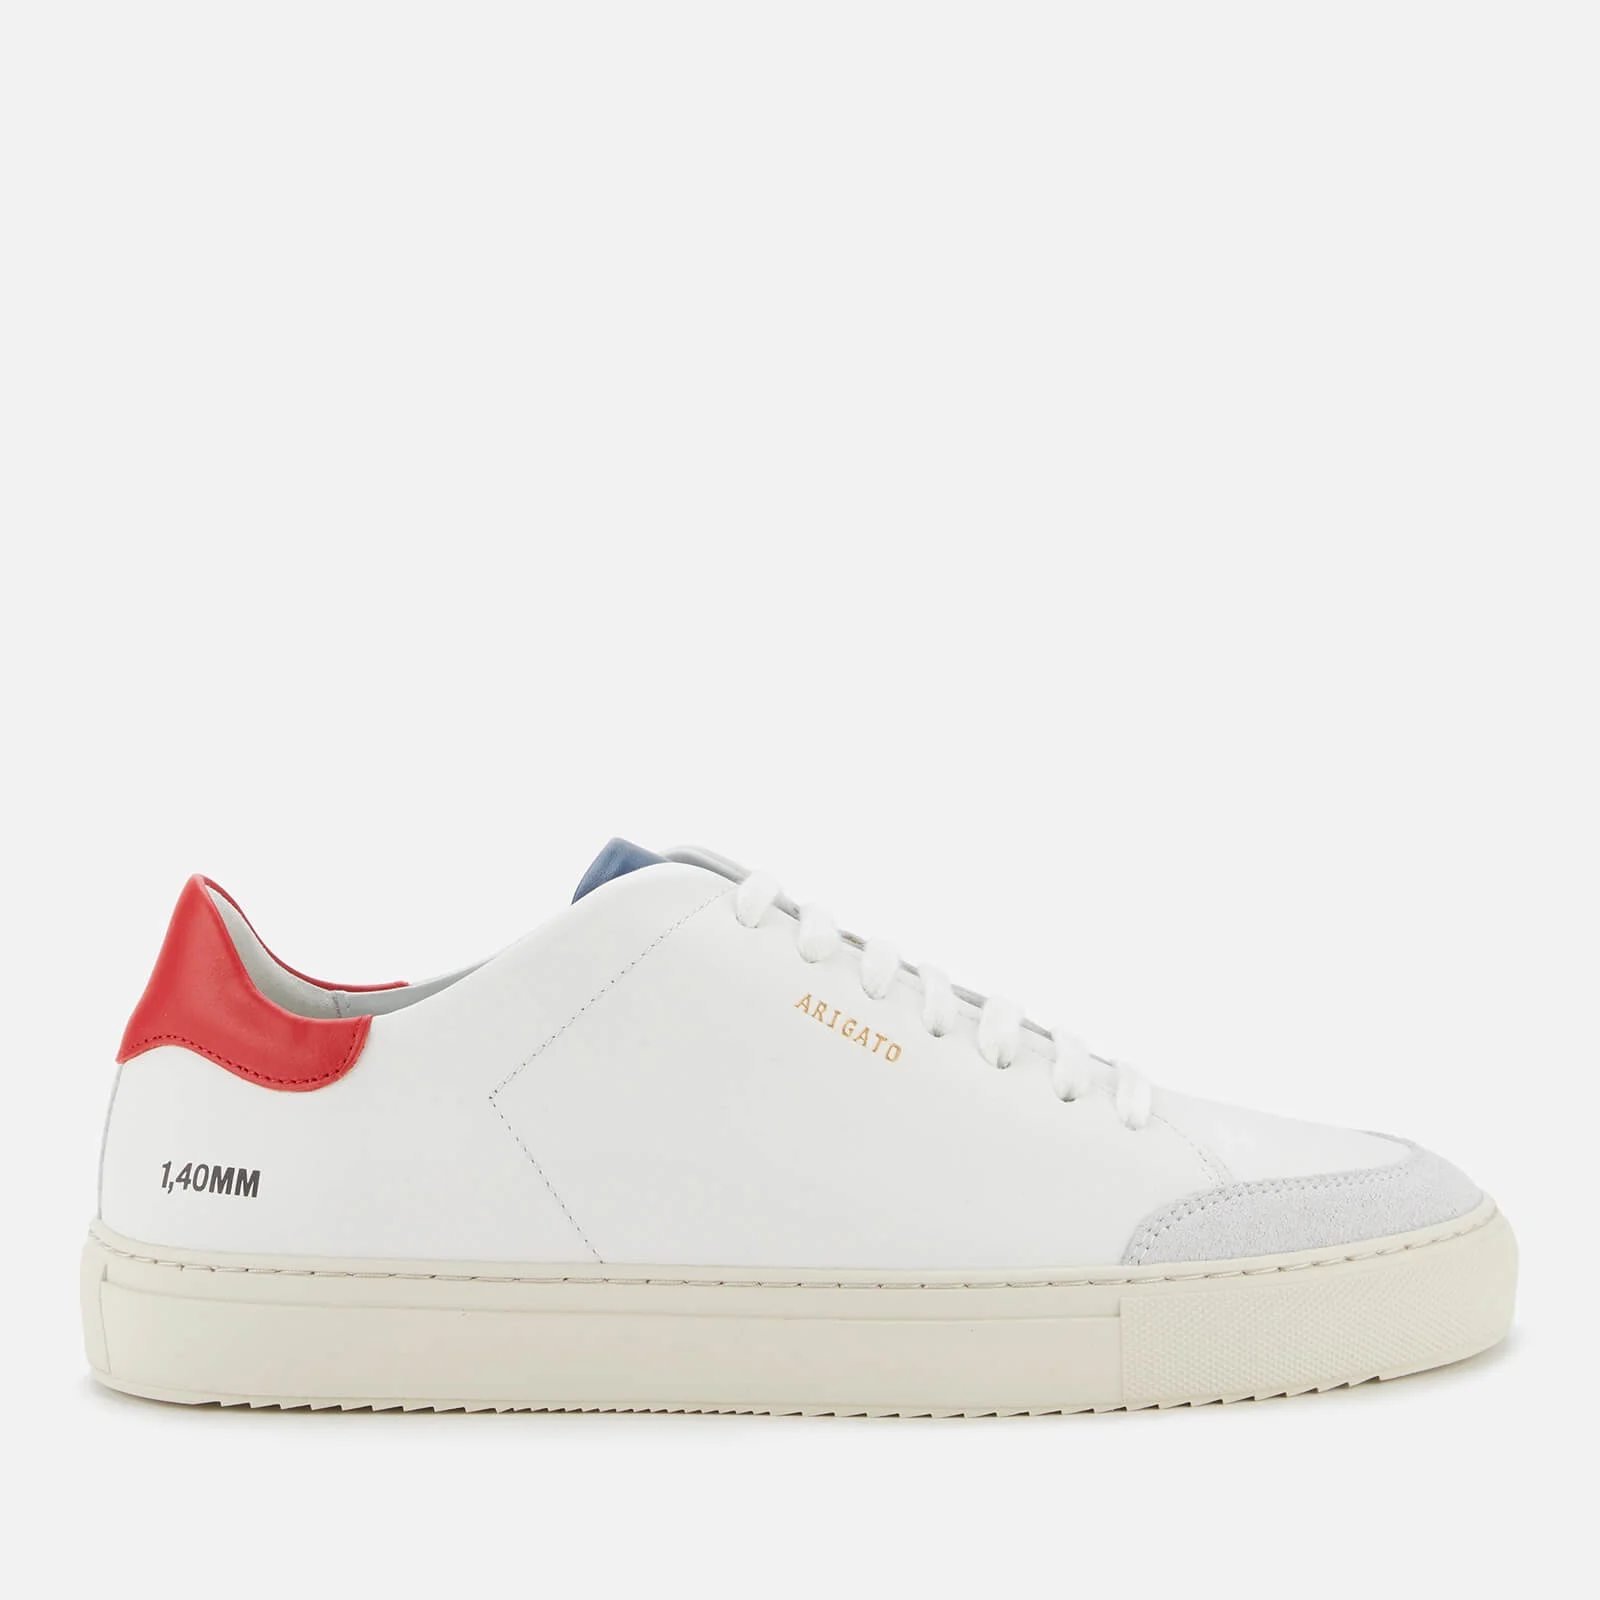 Axel Arigato Men's Clean 90 Triple Leather Cupsole Trainers - White/Red/Blue Image 1